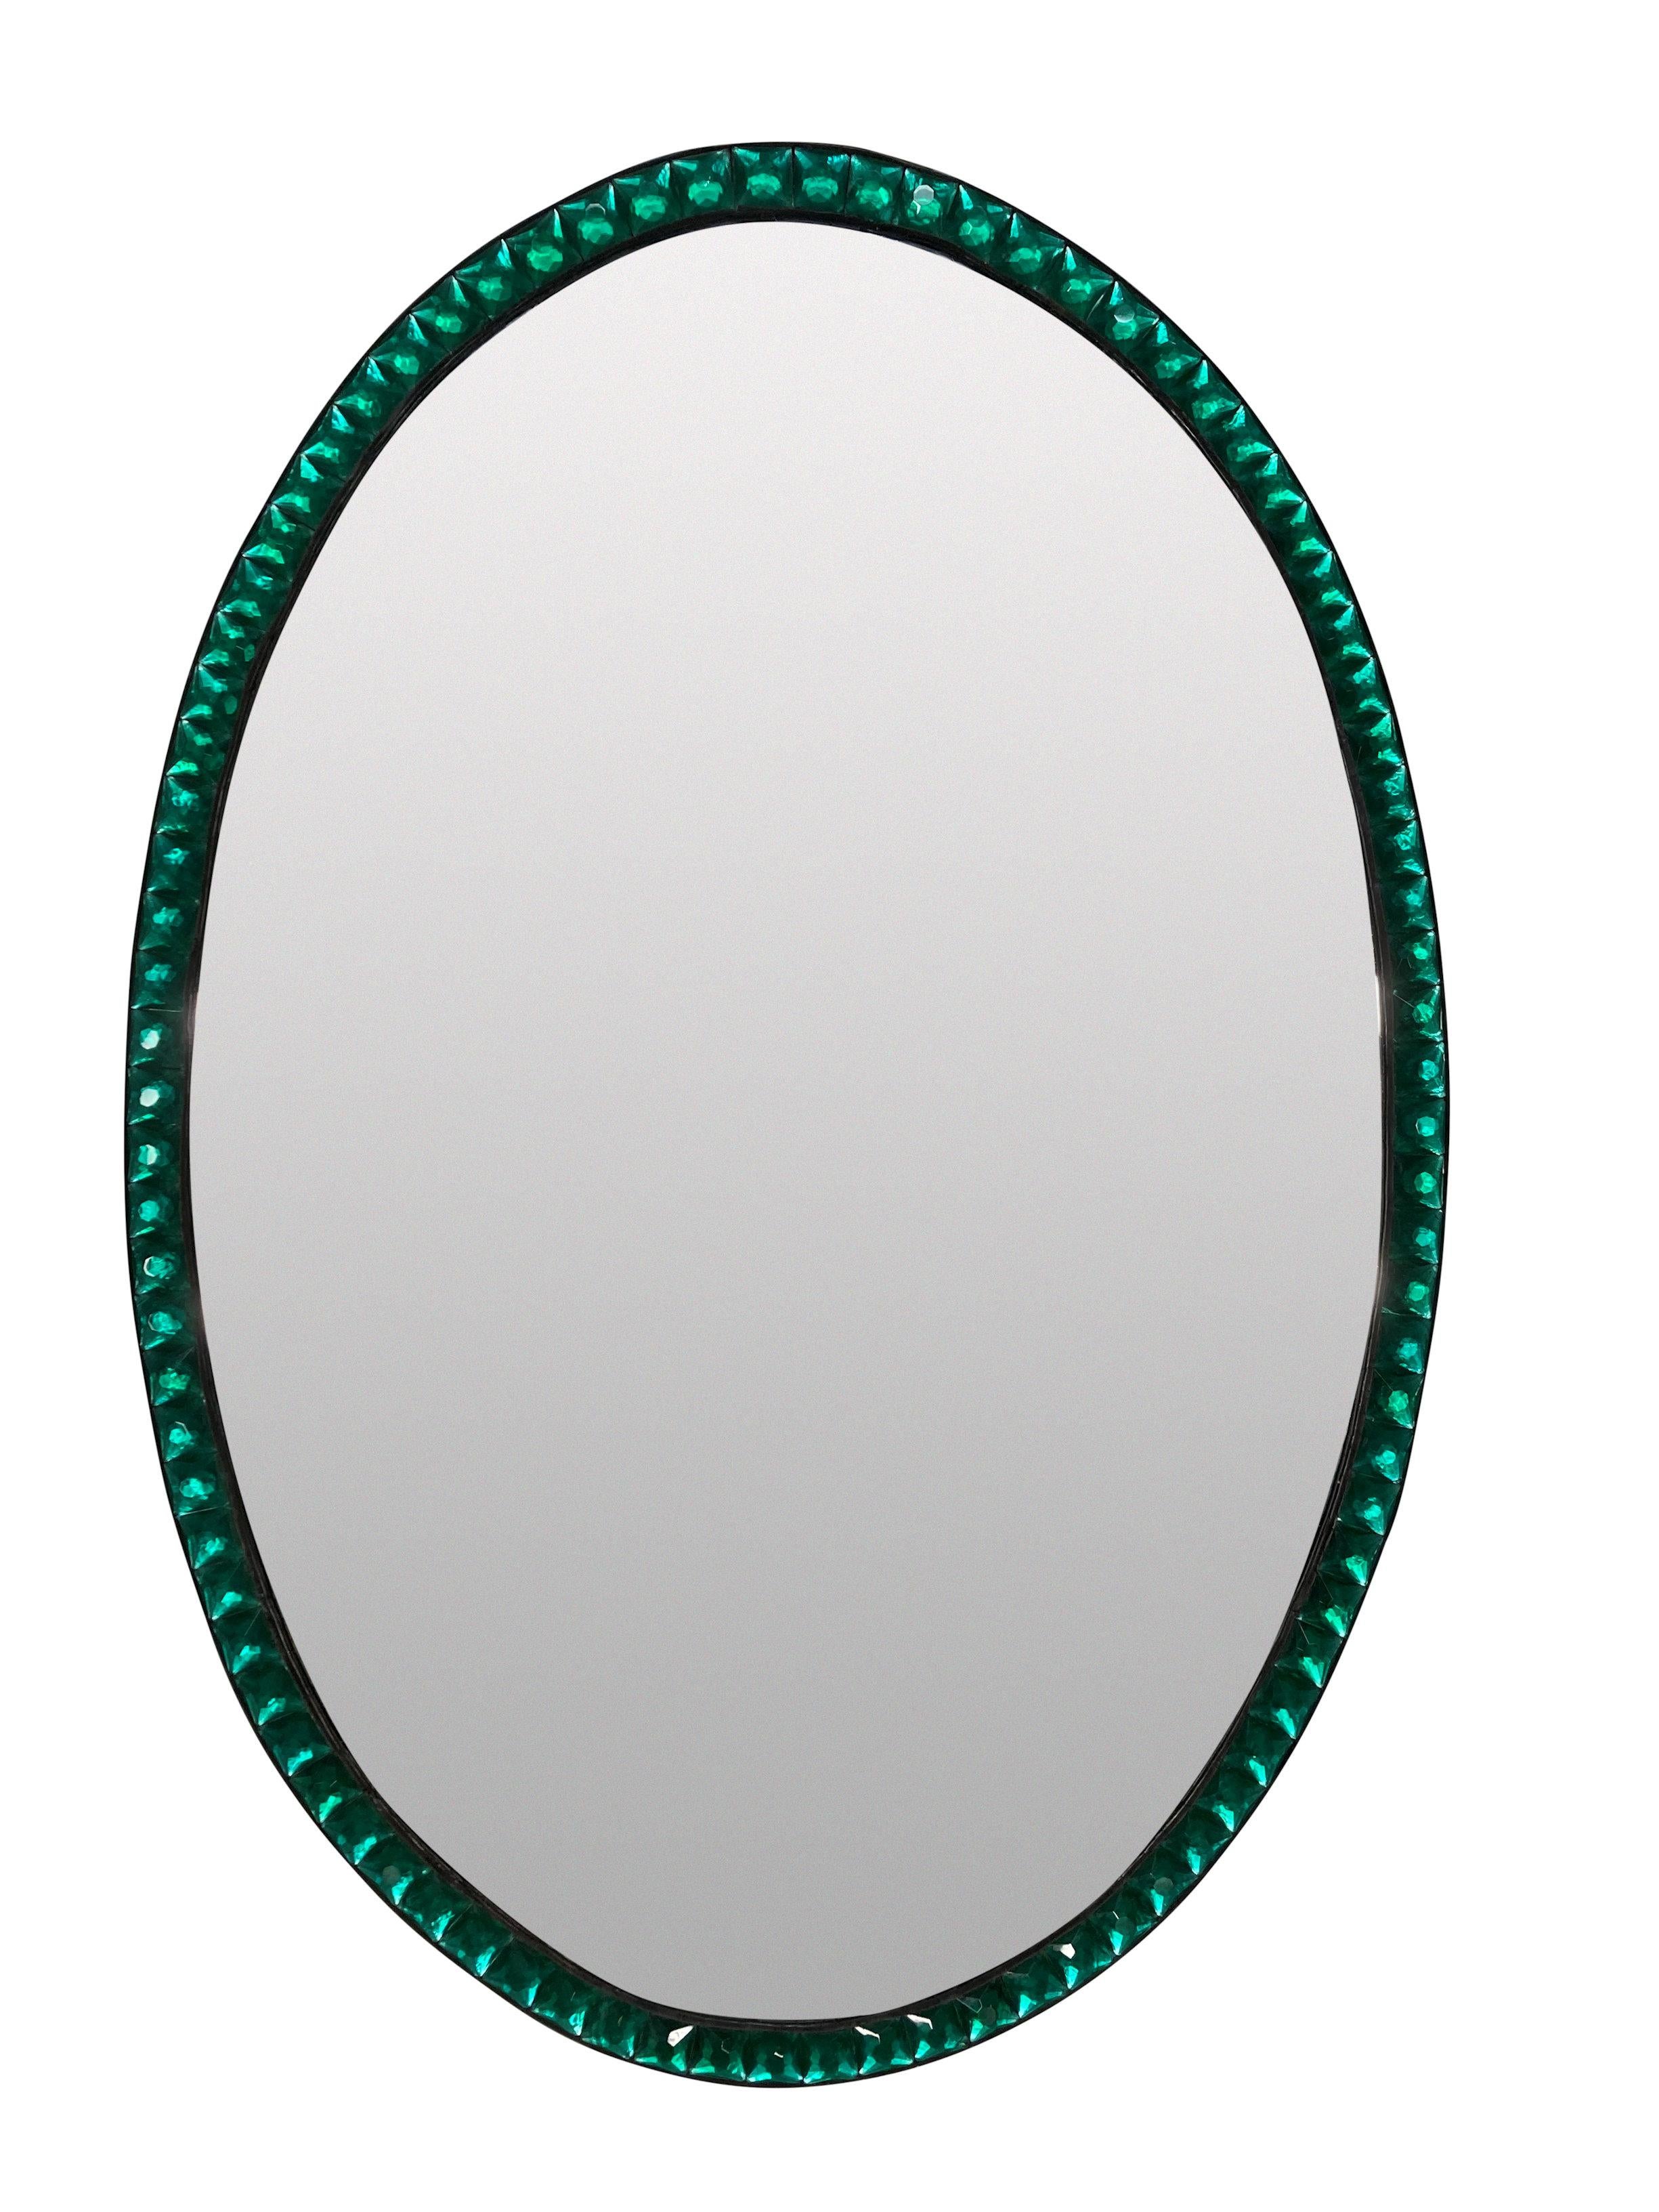 Pair Of Georgian Style Irish Mirrors With Emerald Glass Faeted Borders 1